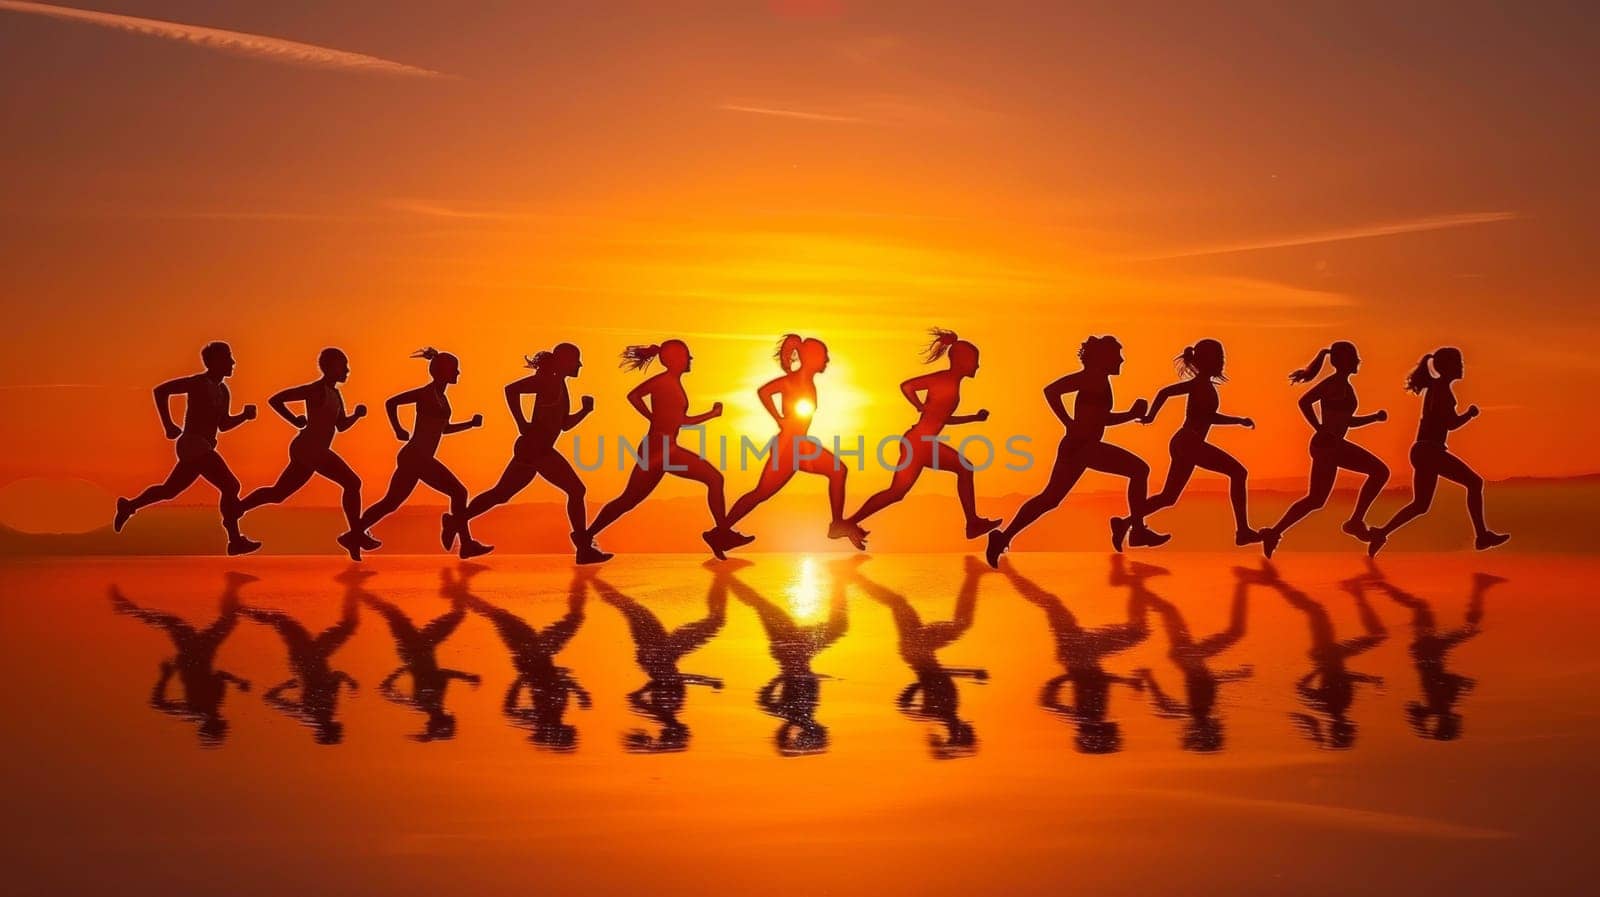 A group of people running in silhouette against a sunset